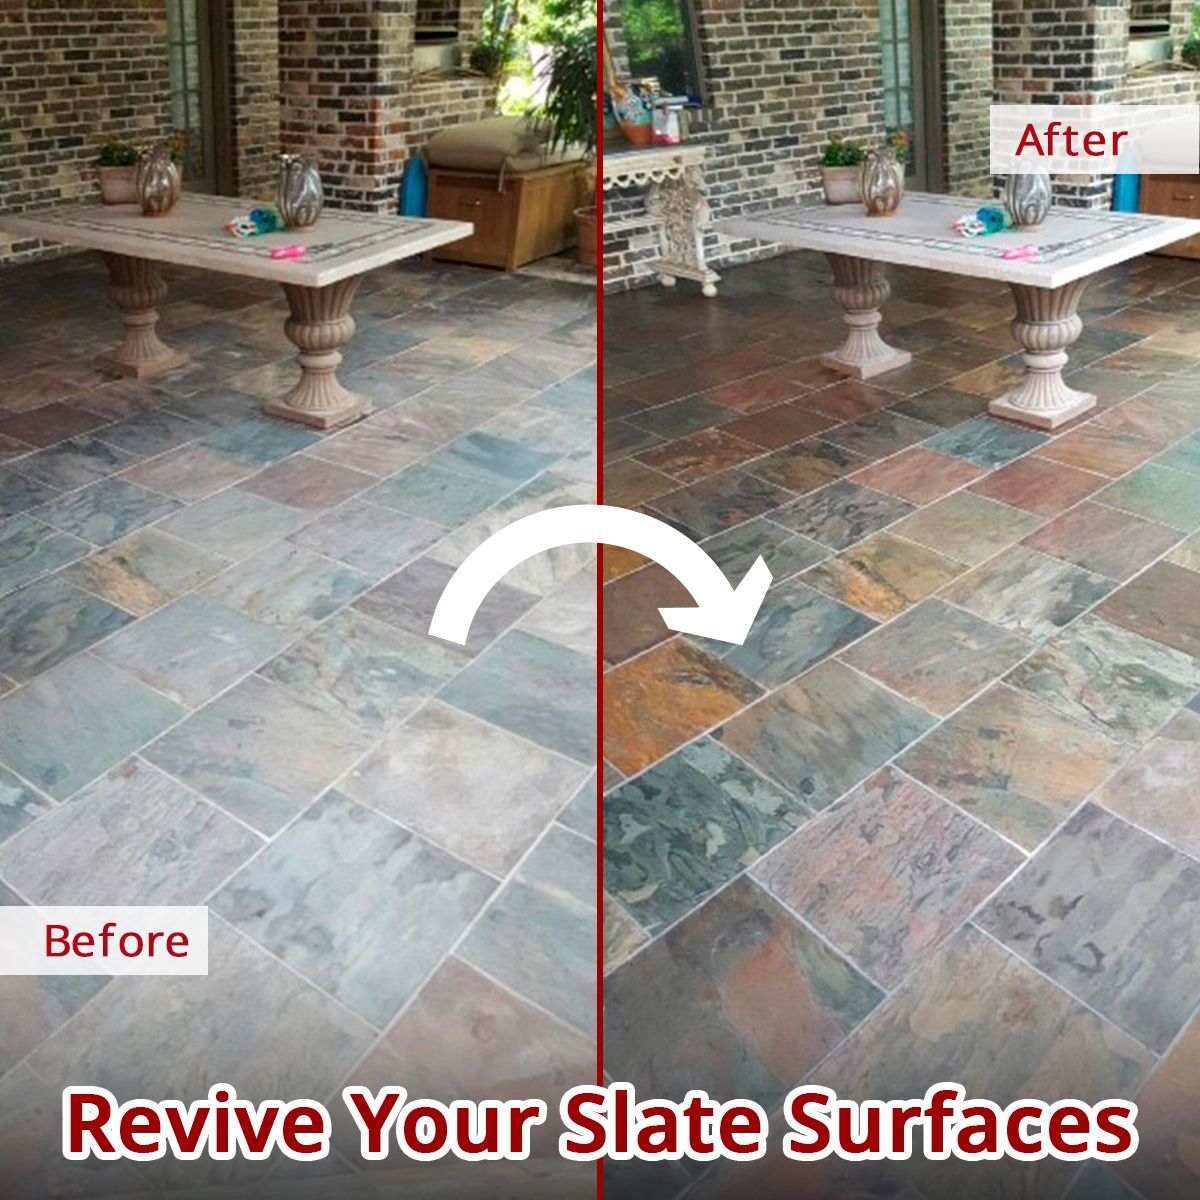 Revive Your Slate Surfaces